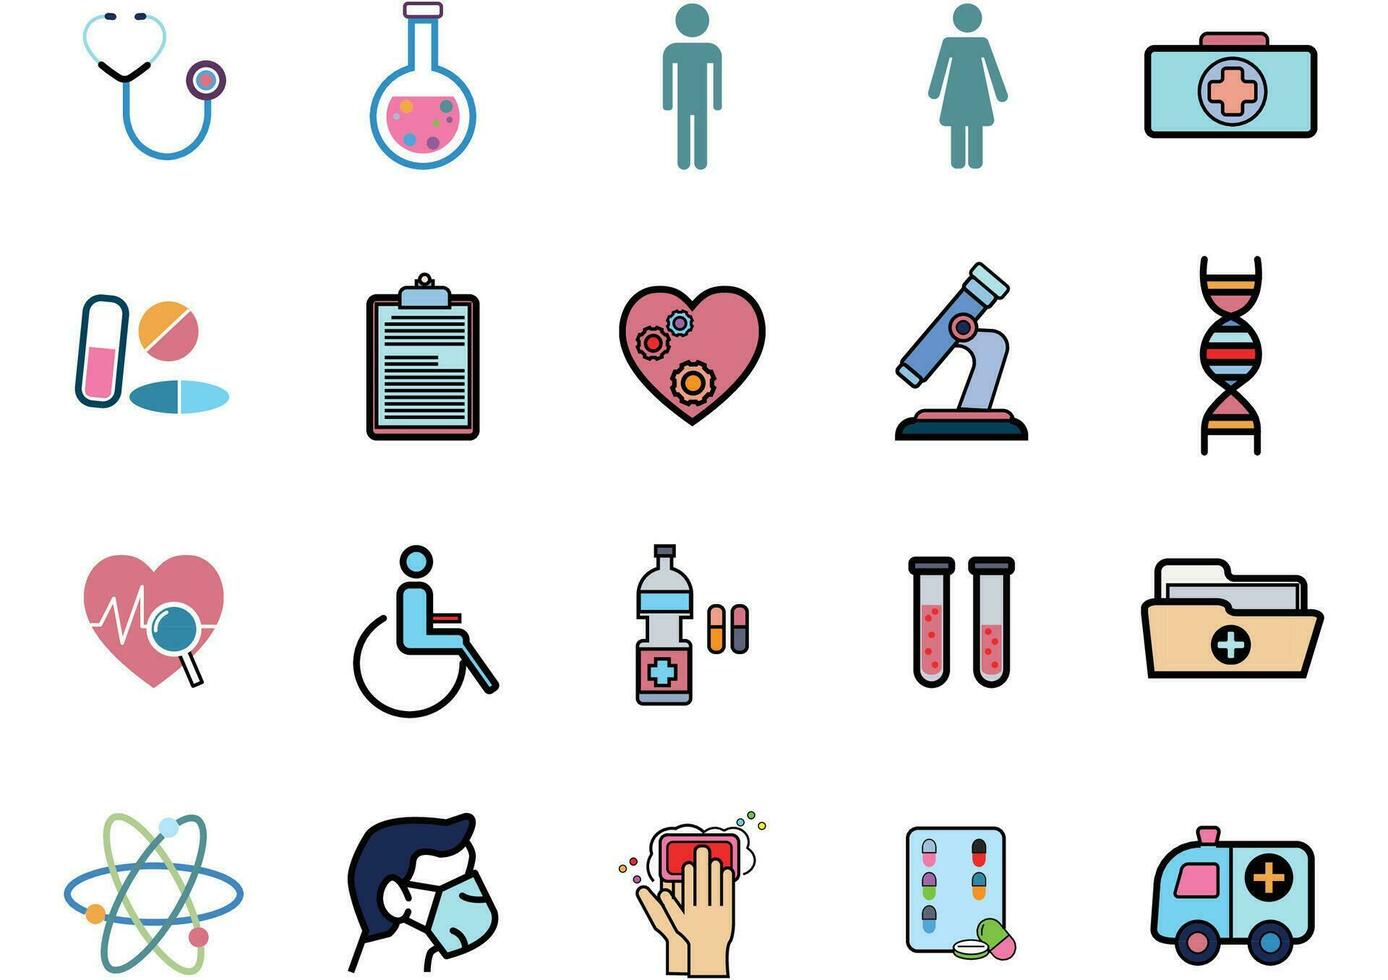 Set of health Protection Related Vector icons. such as cleaning, protect covid-19, hand dryer, soap, wipe, sanitary and more icons.Vector health and Prevent disease concept.